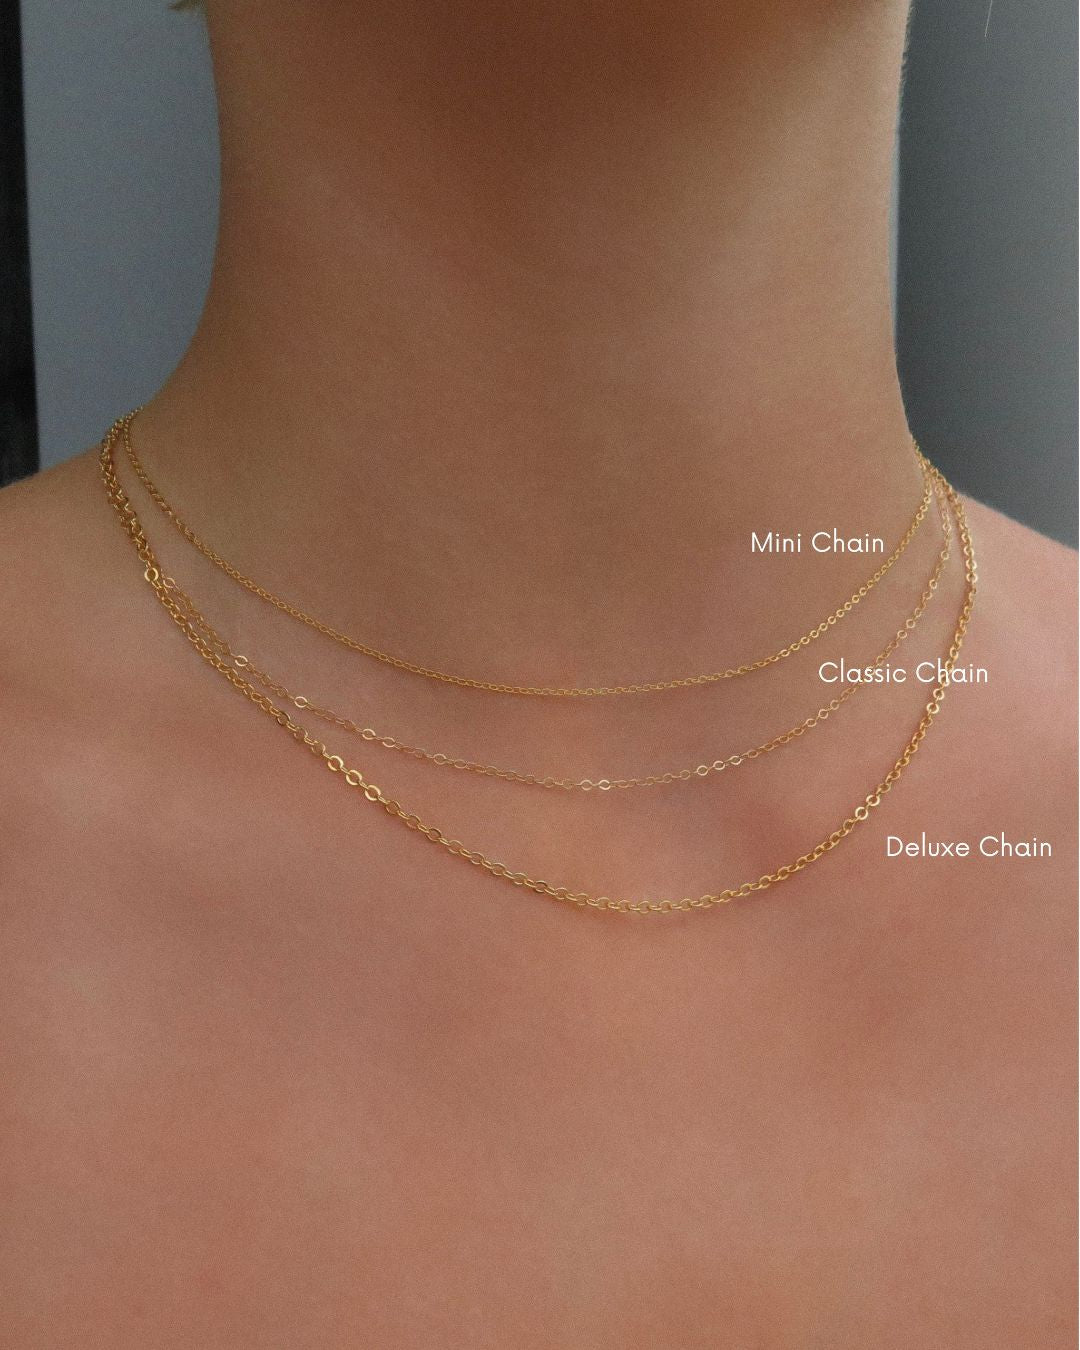 Large Cross Necklace  - 14k Yellow Gold Fill